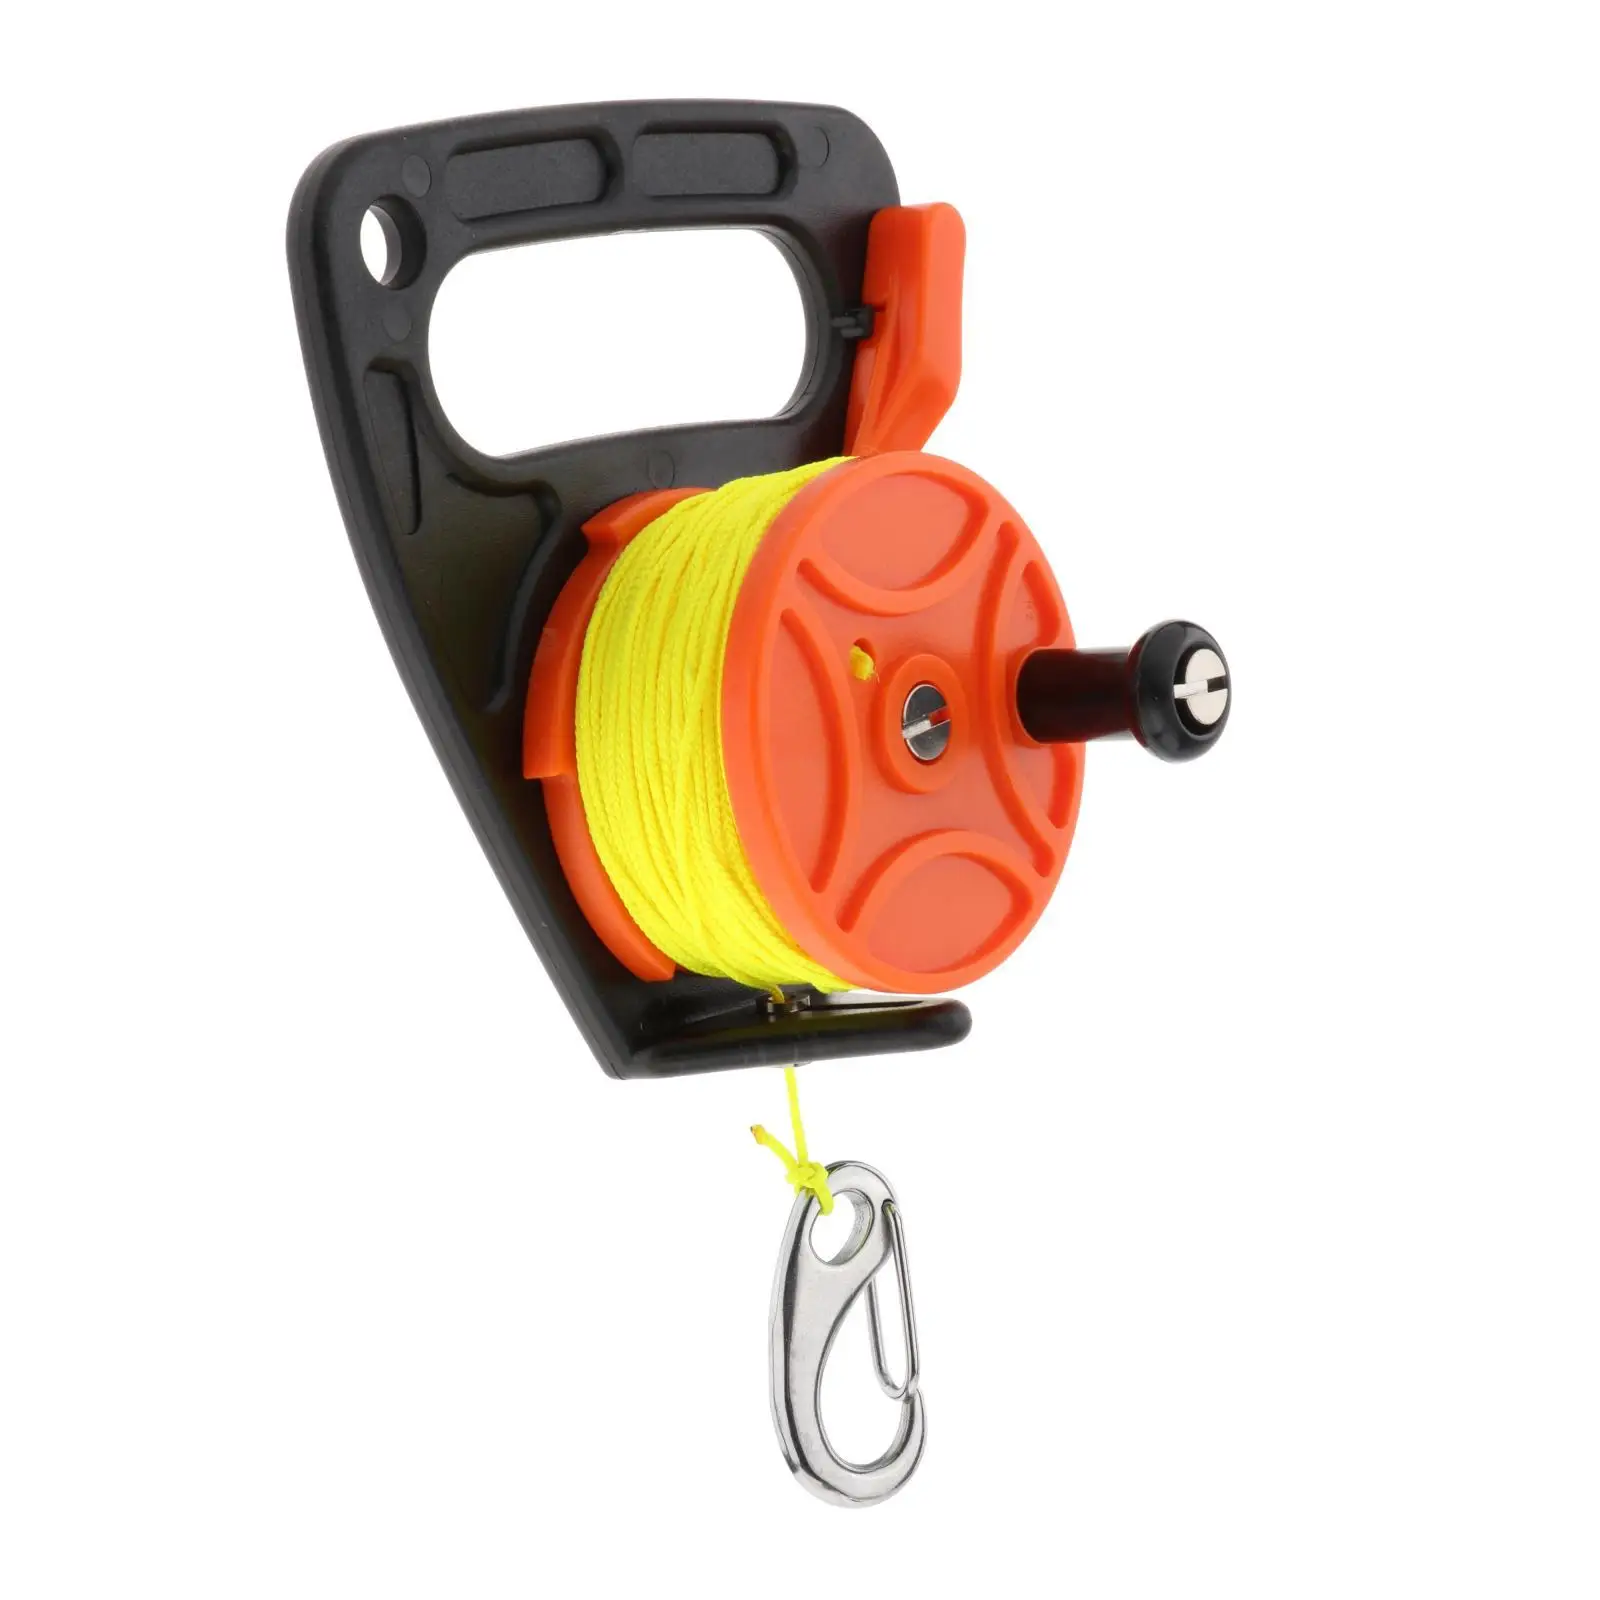 Scuba Diving Reel with Handle for Kayaking Open Water Recreational Diving Spear